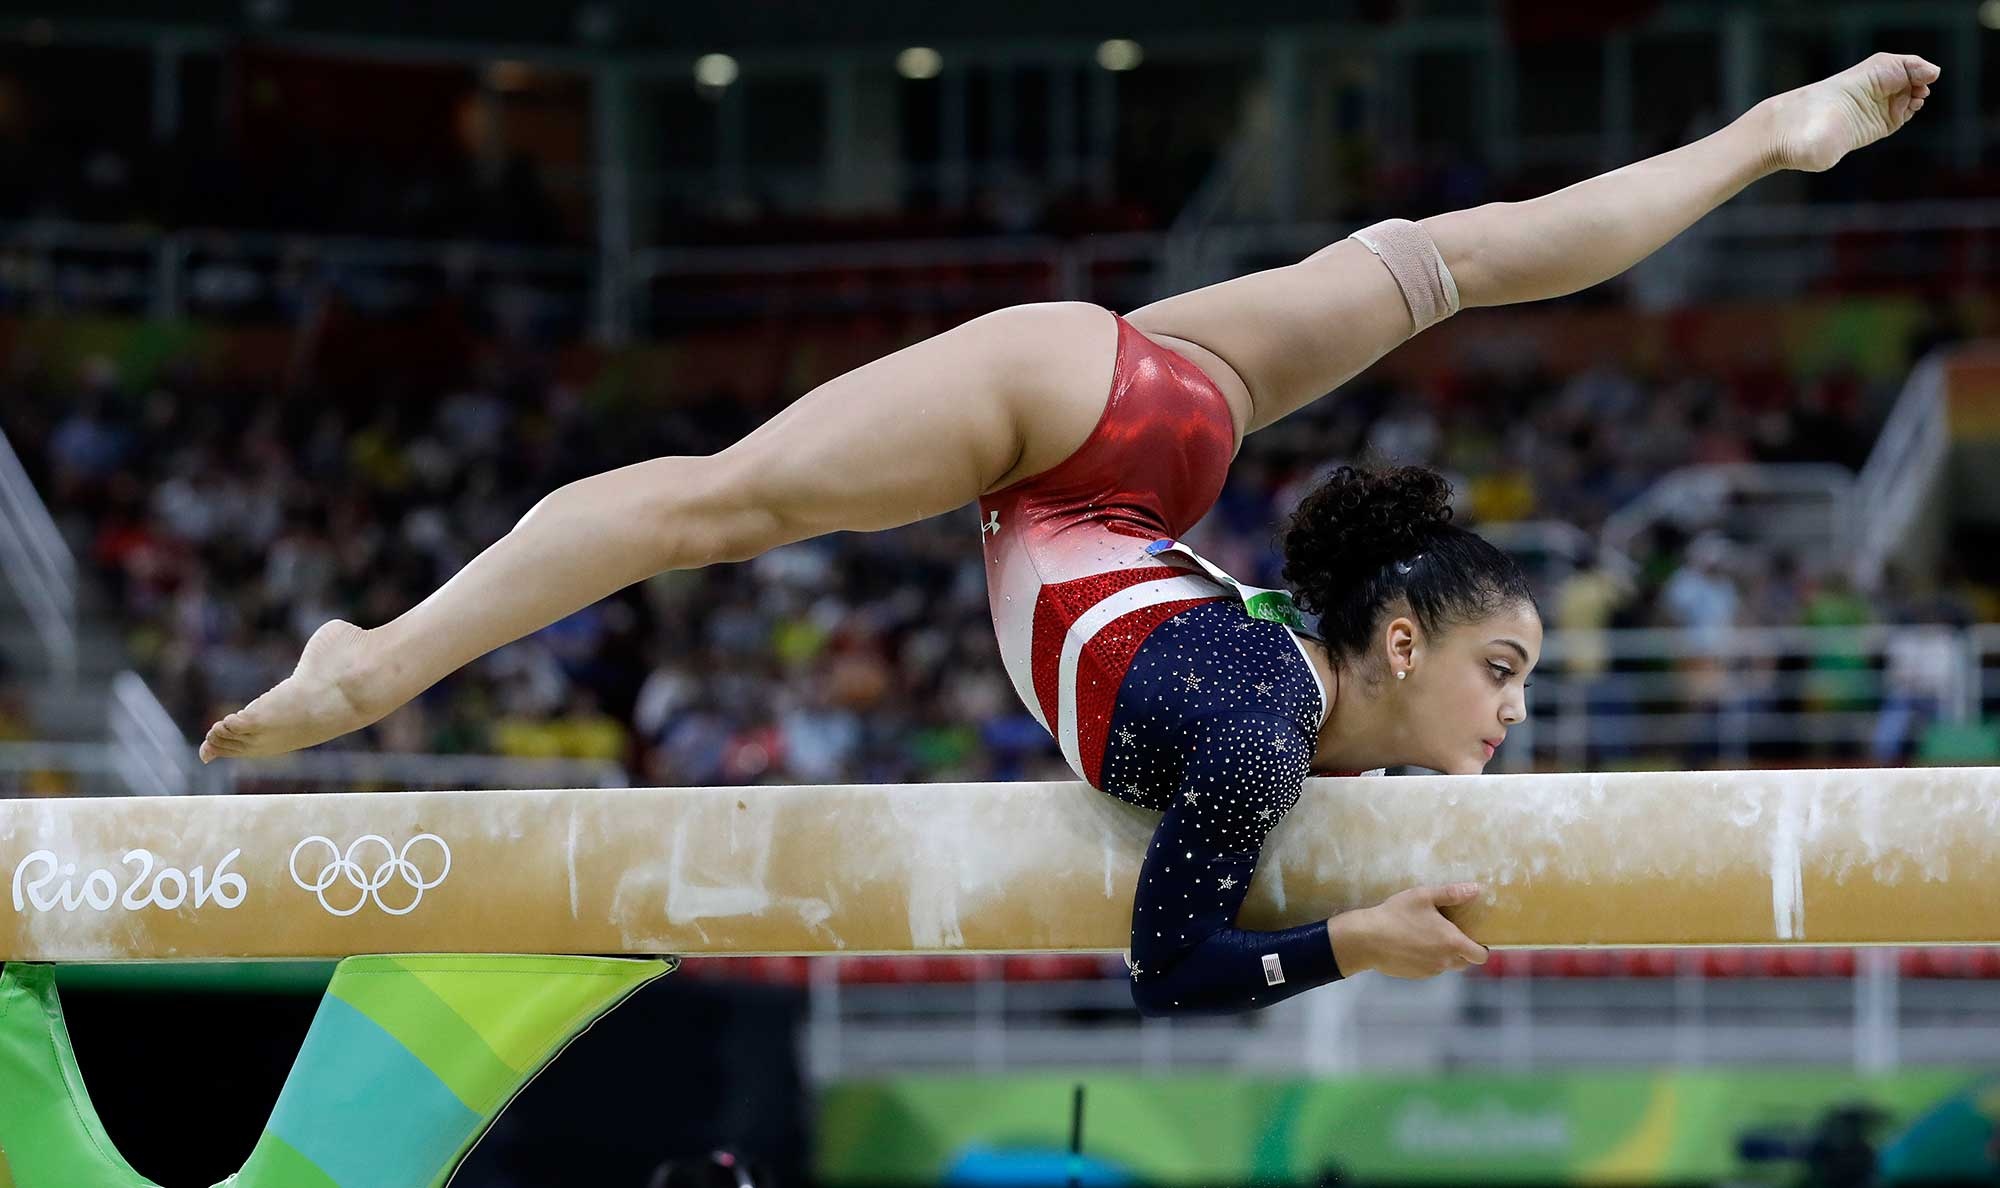 Latest sports wallpapers, Gymnastics in high definition, Picture perfect, Stunning visuals, 2000x1190 HD Desktop